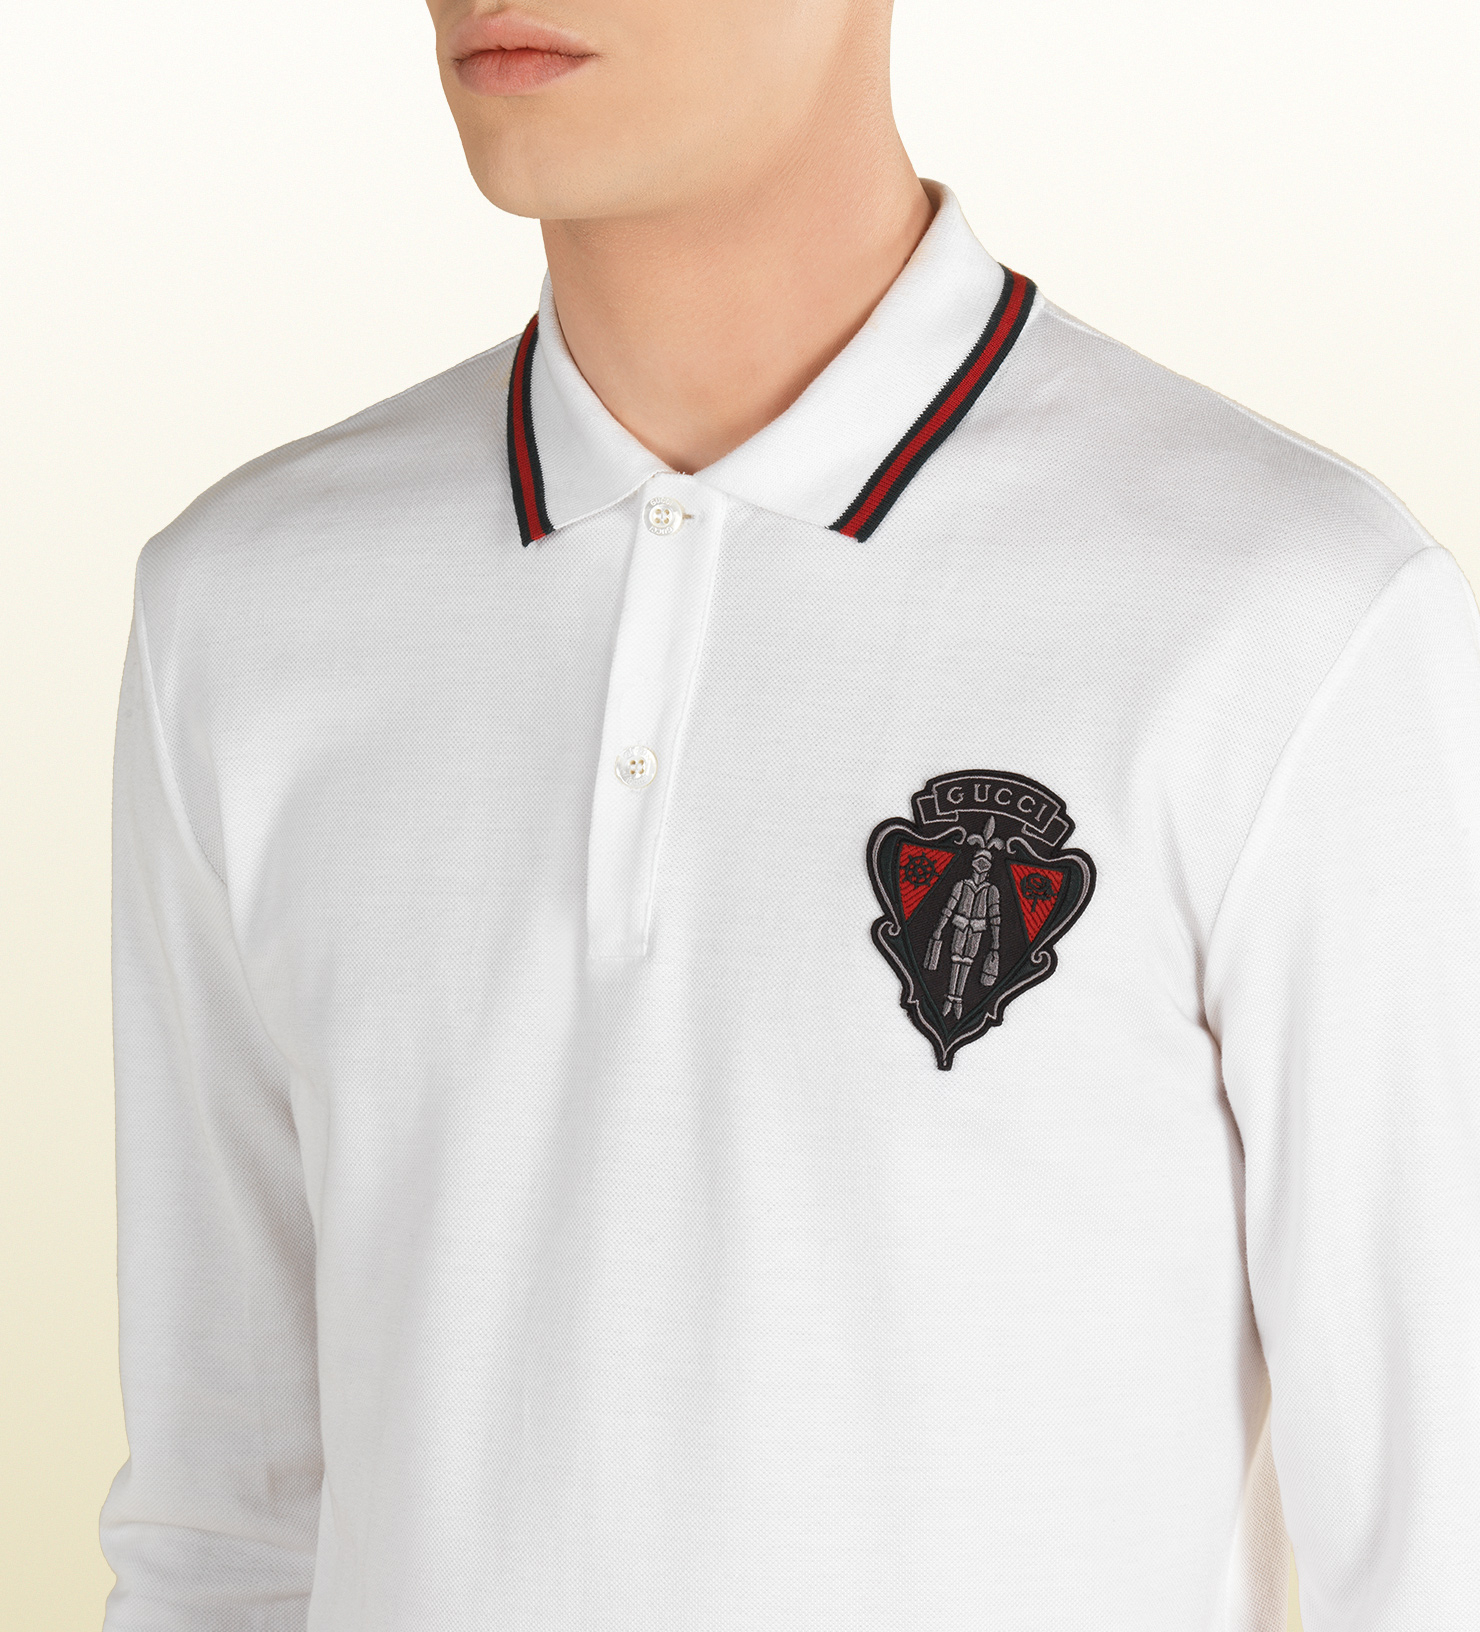 Gucci Long Sleeve Polo Shirt in White for Men - Lyst